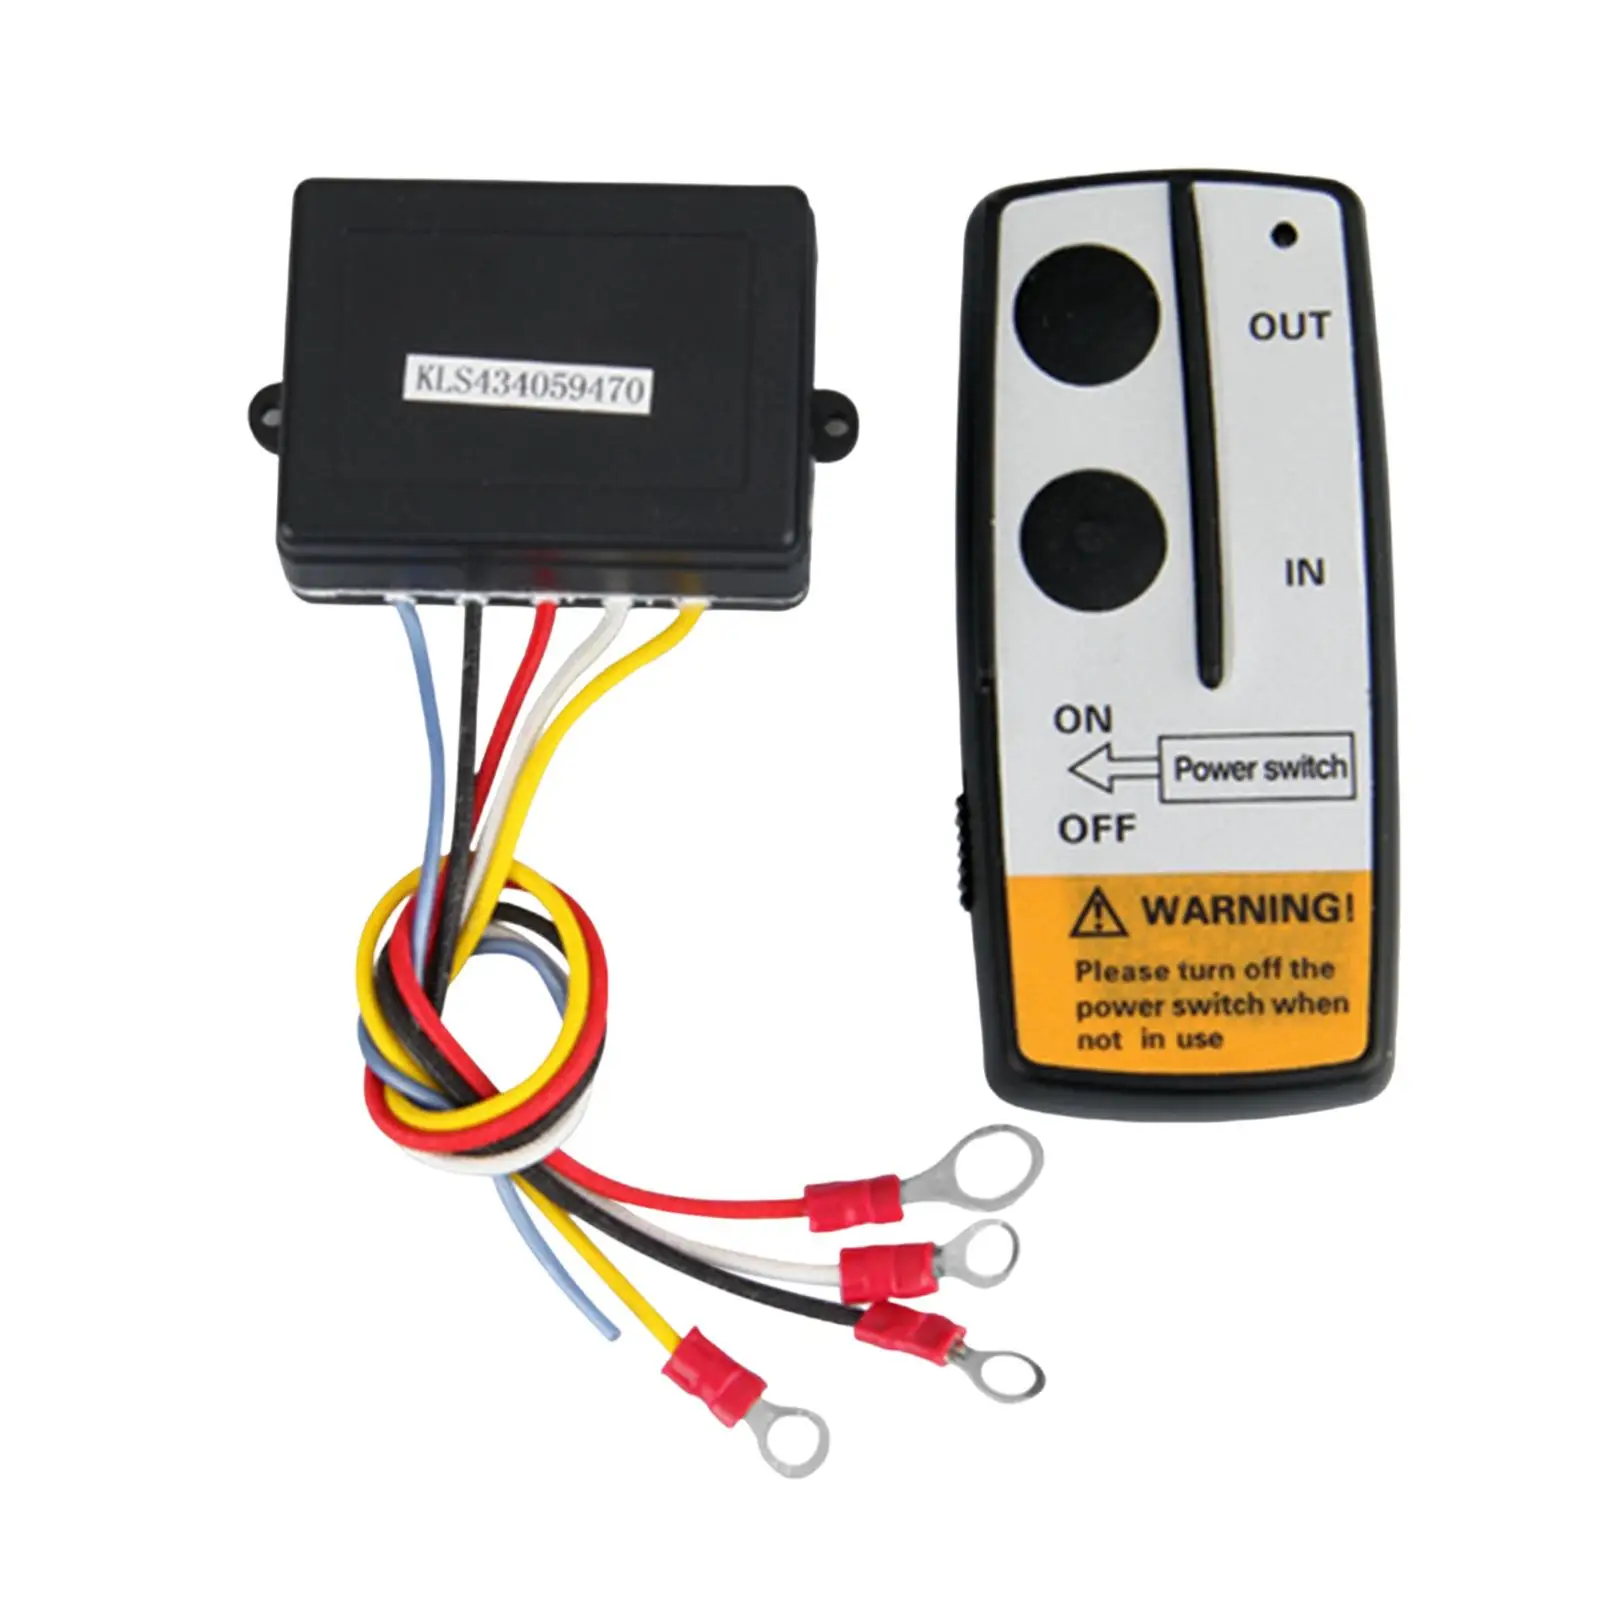 Winch Remote Control Kit 12V Durable Handset Switch for Truck SUV ATV